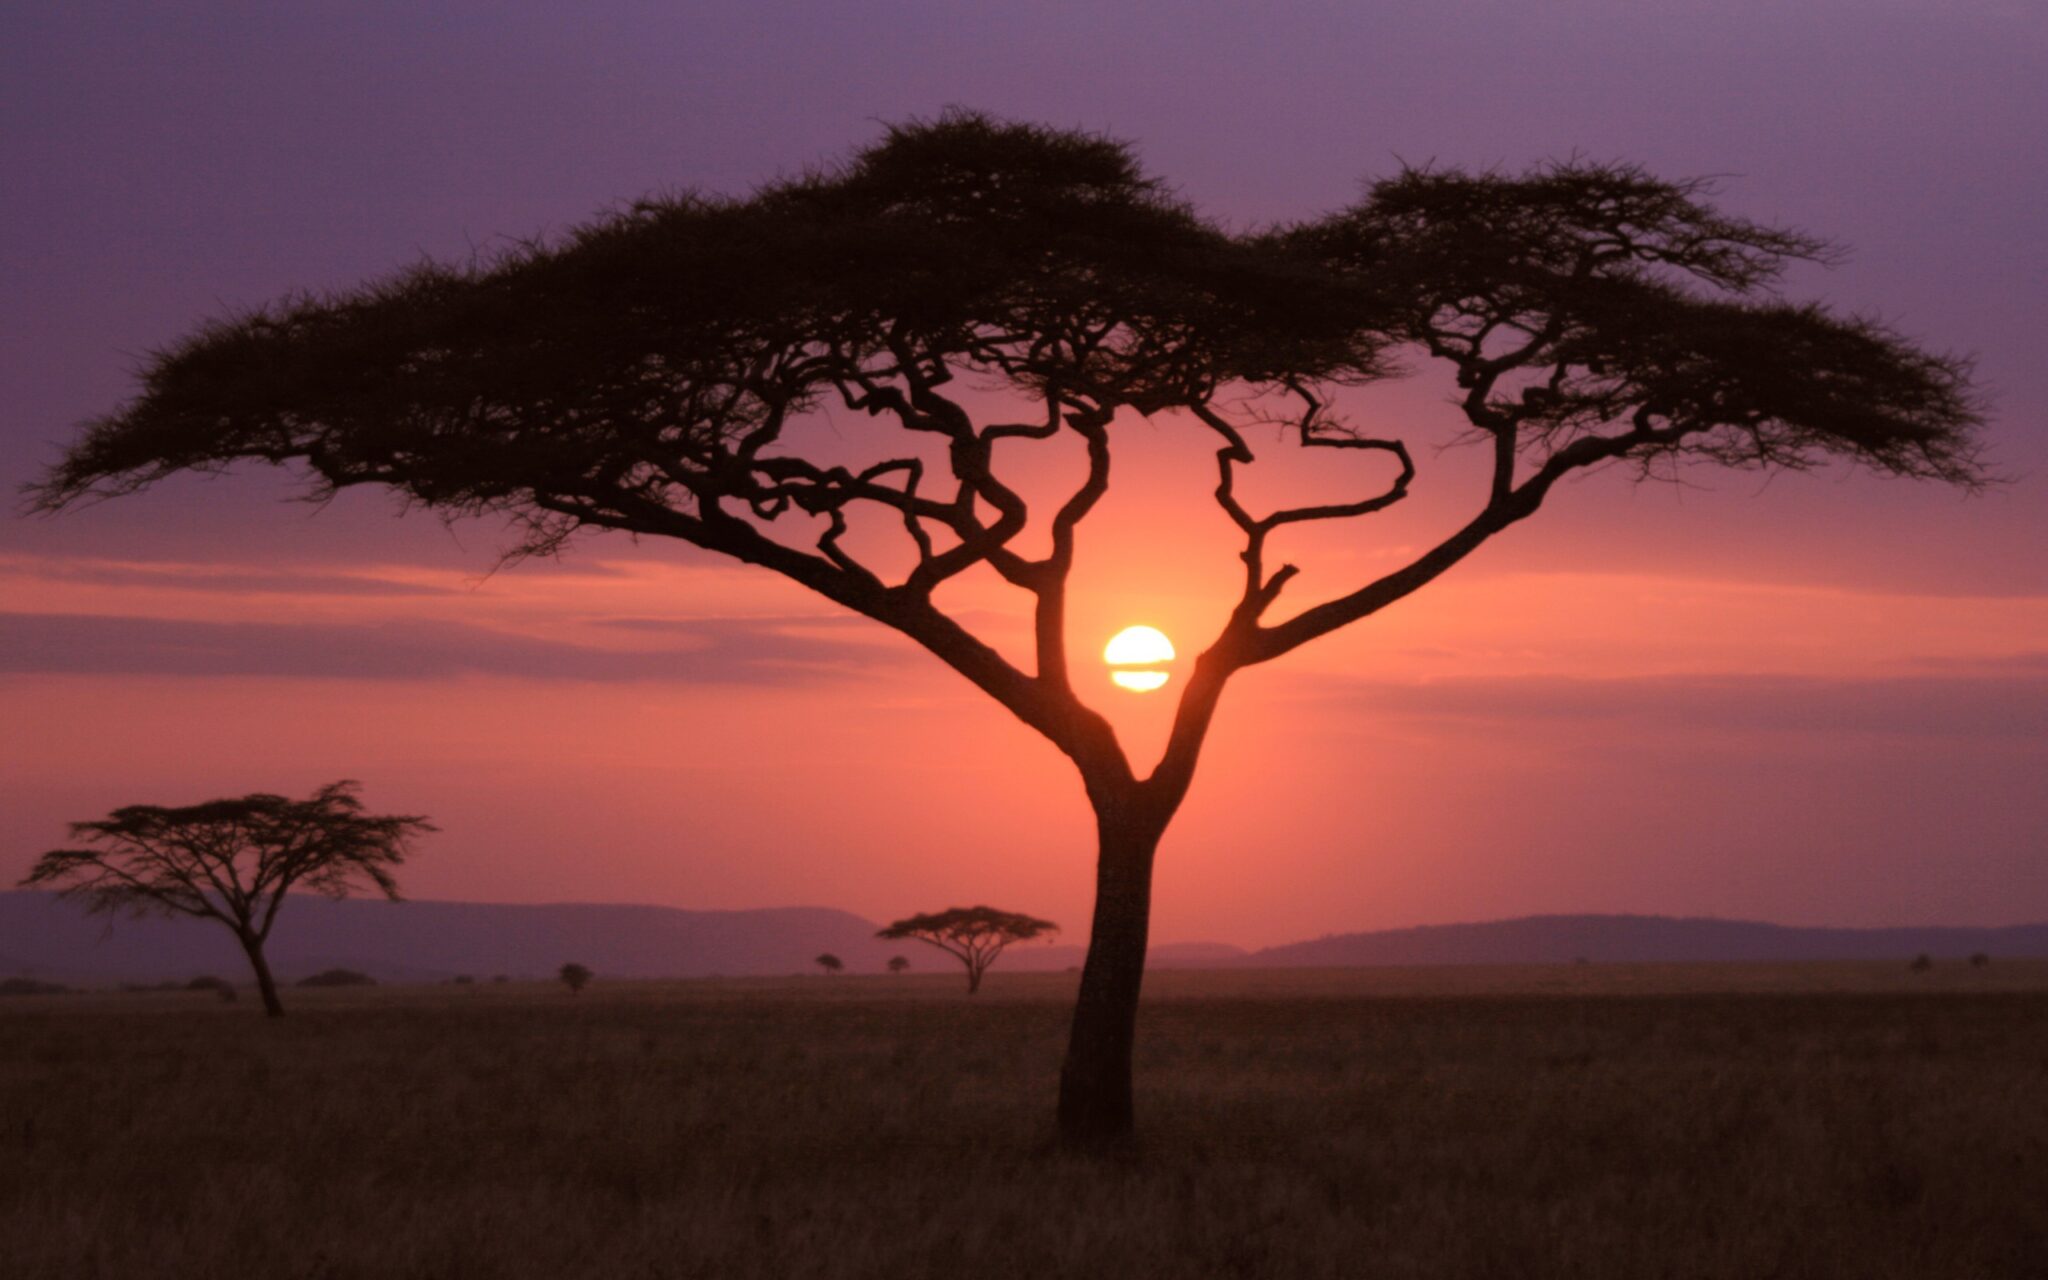 Few things can rival an African sunset